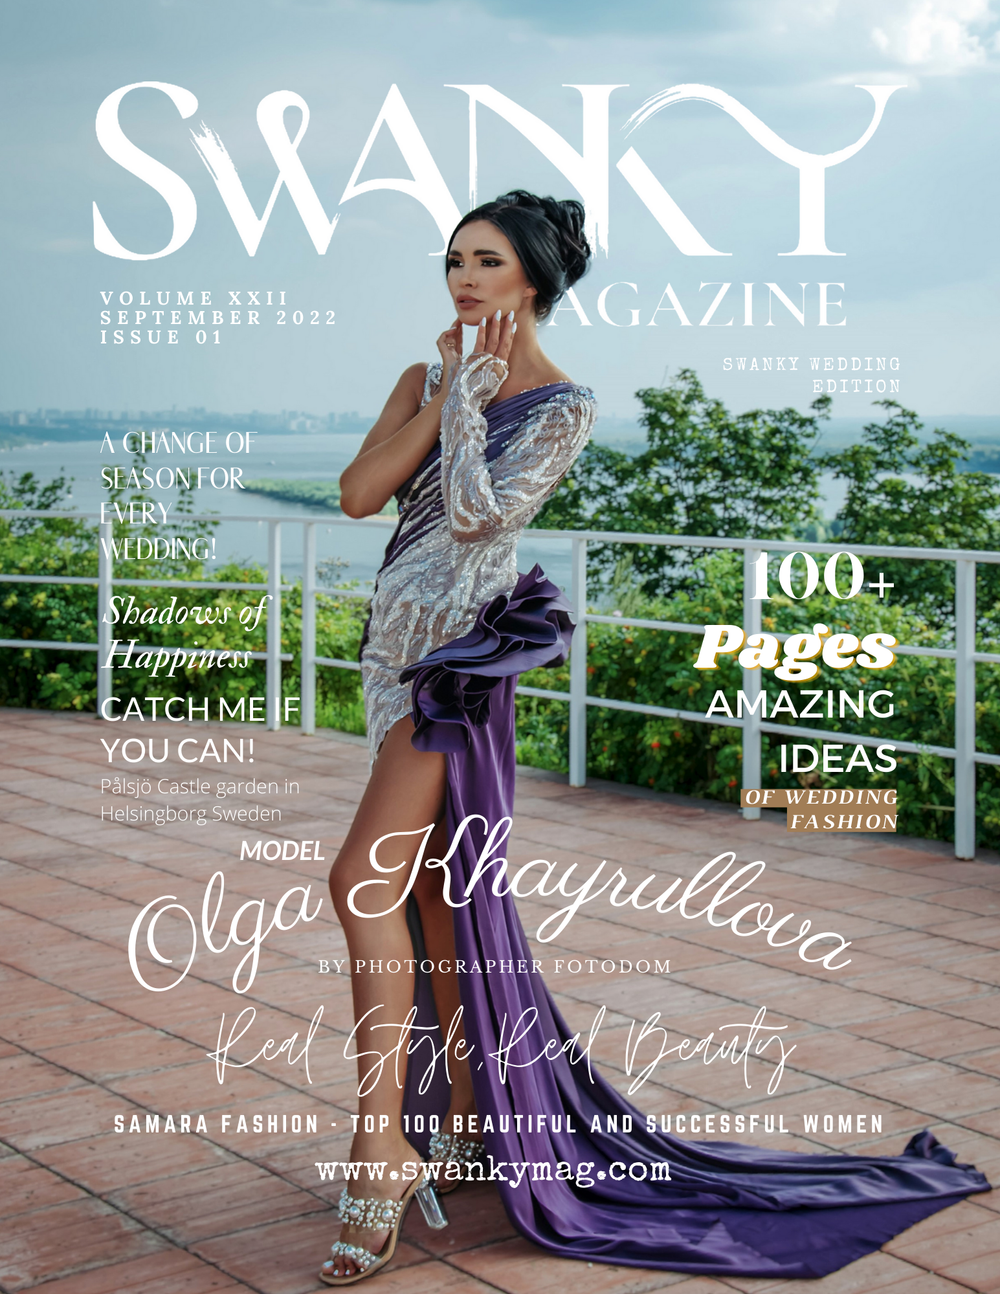 Swanky Wedding Editions September VOL XXII Issue 01 - PRINT ISSUE